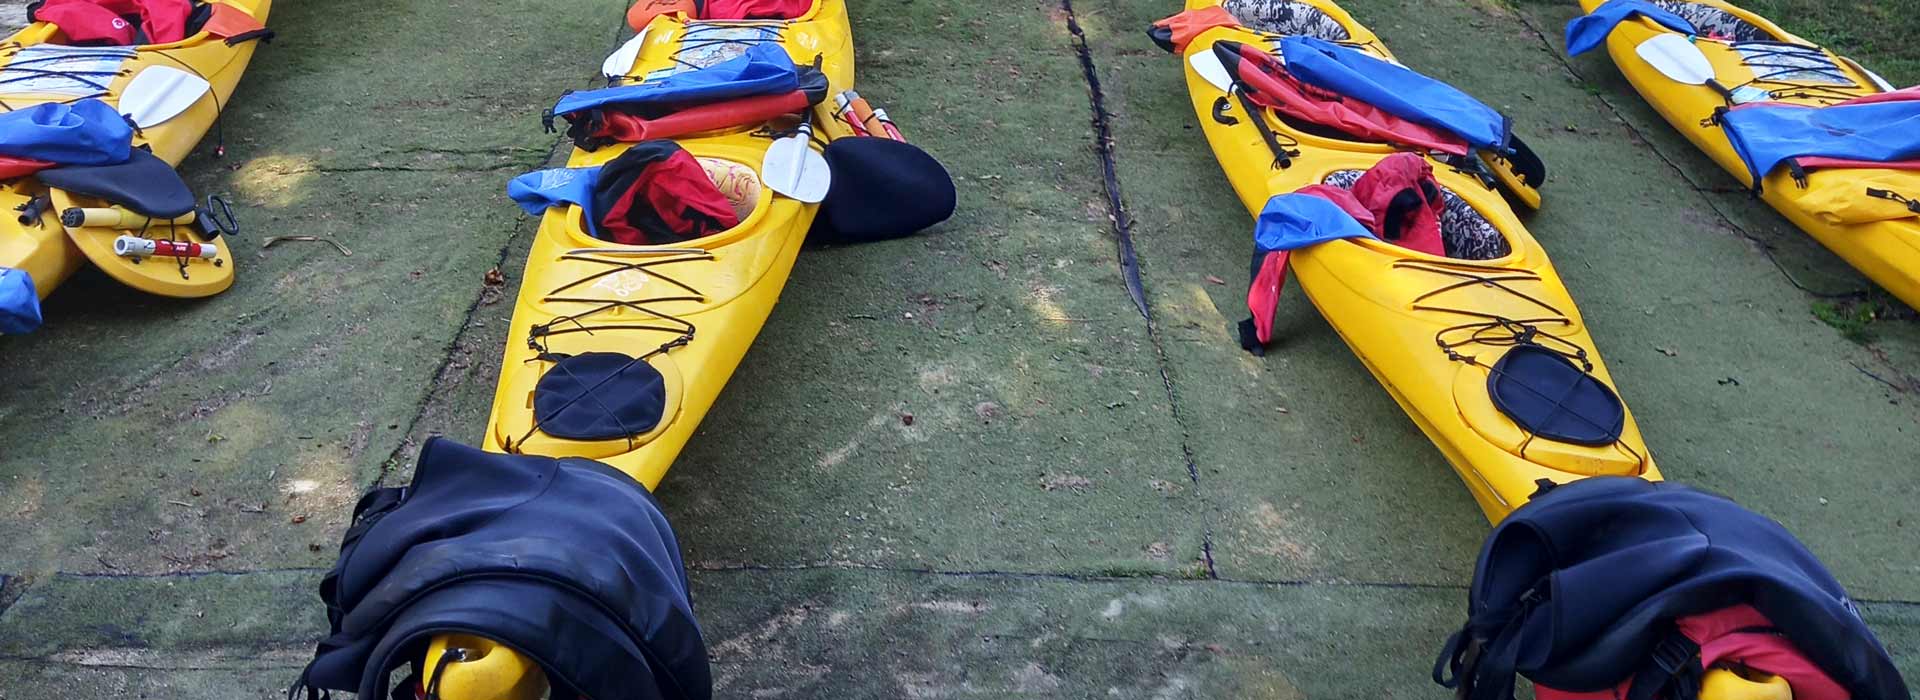 Kayaks ready and waiting for your kayaking safety briefing